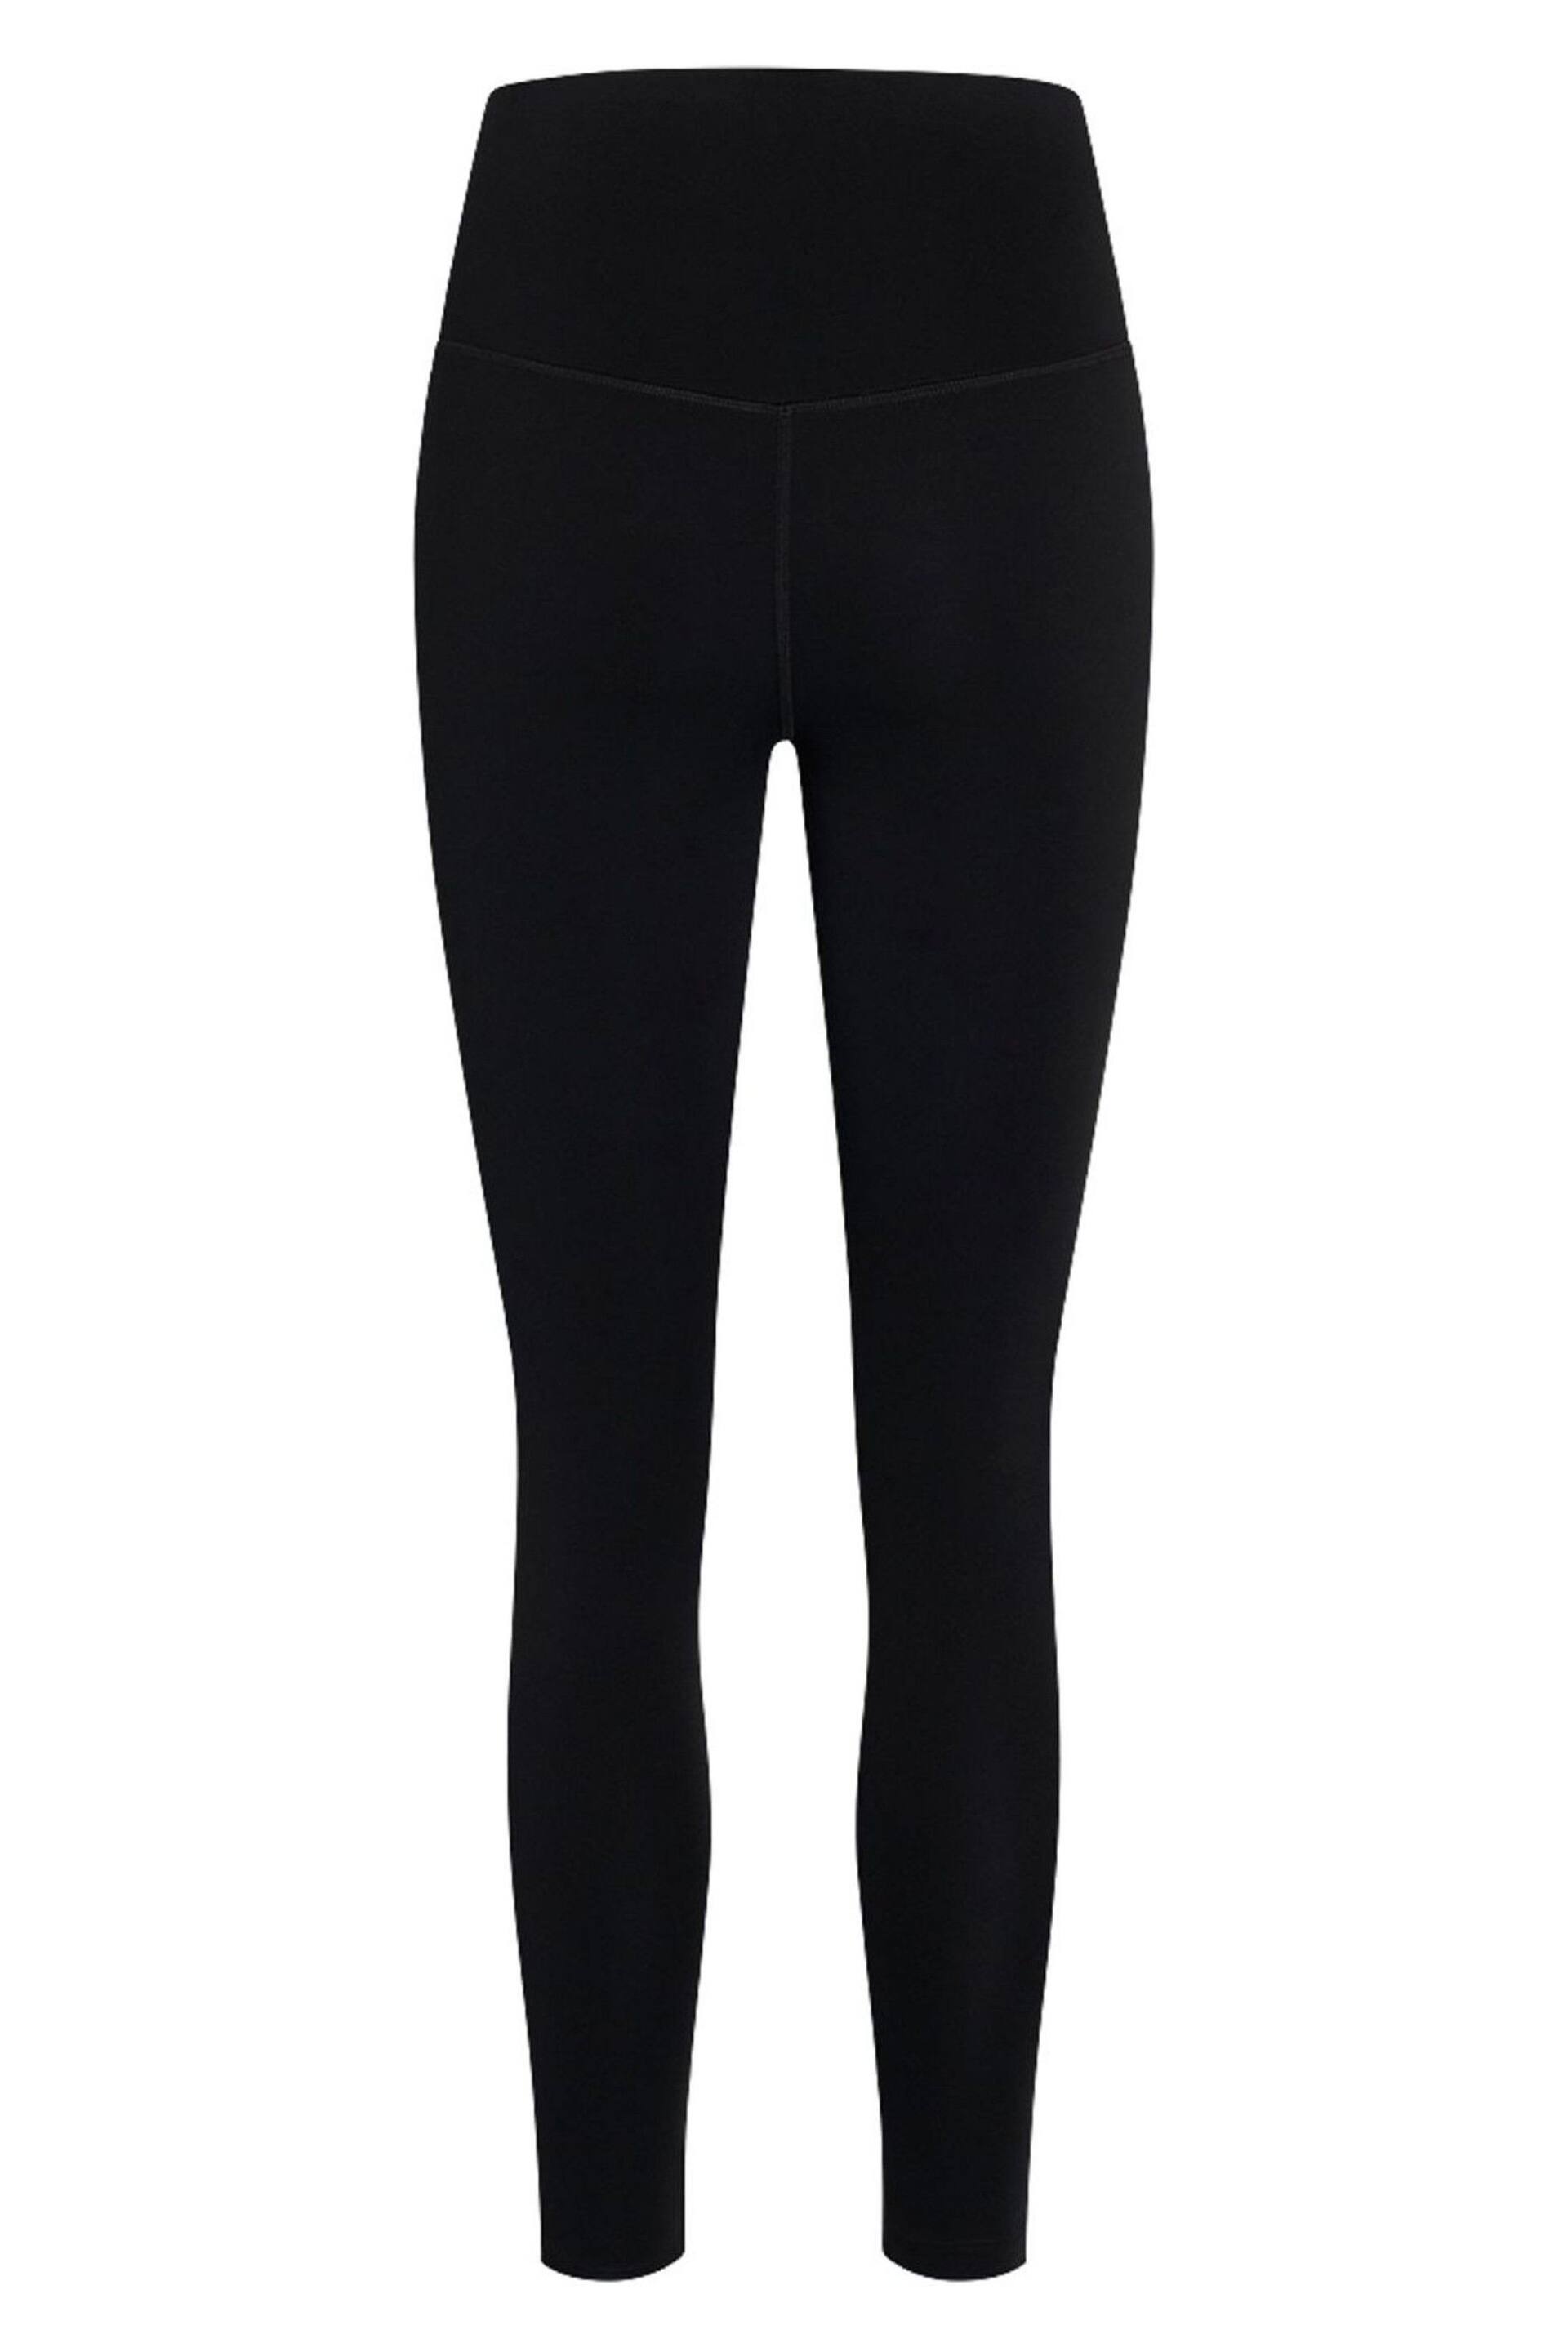 Girlfriend Collective High Rise 7/8 Float Leggings - Image 5 of 6